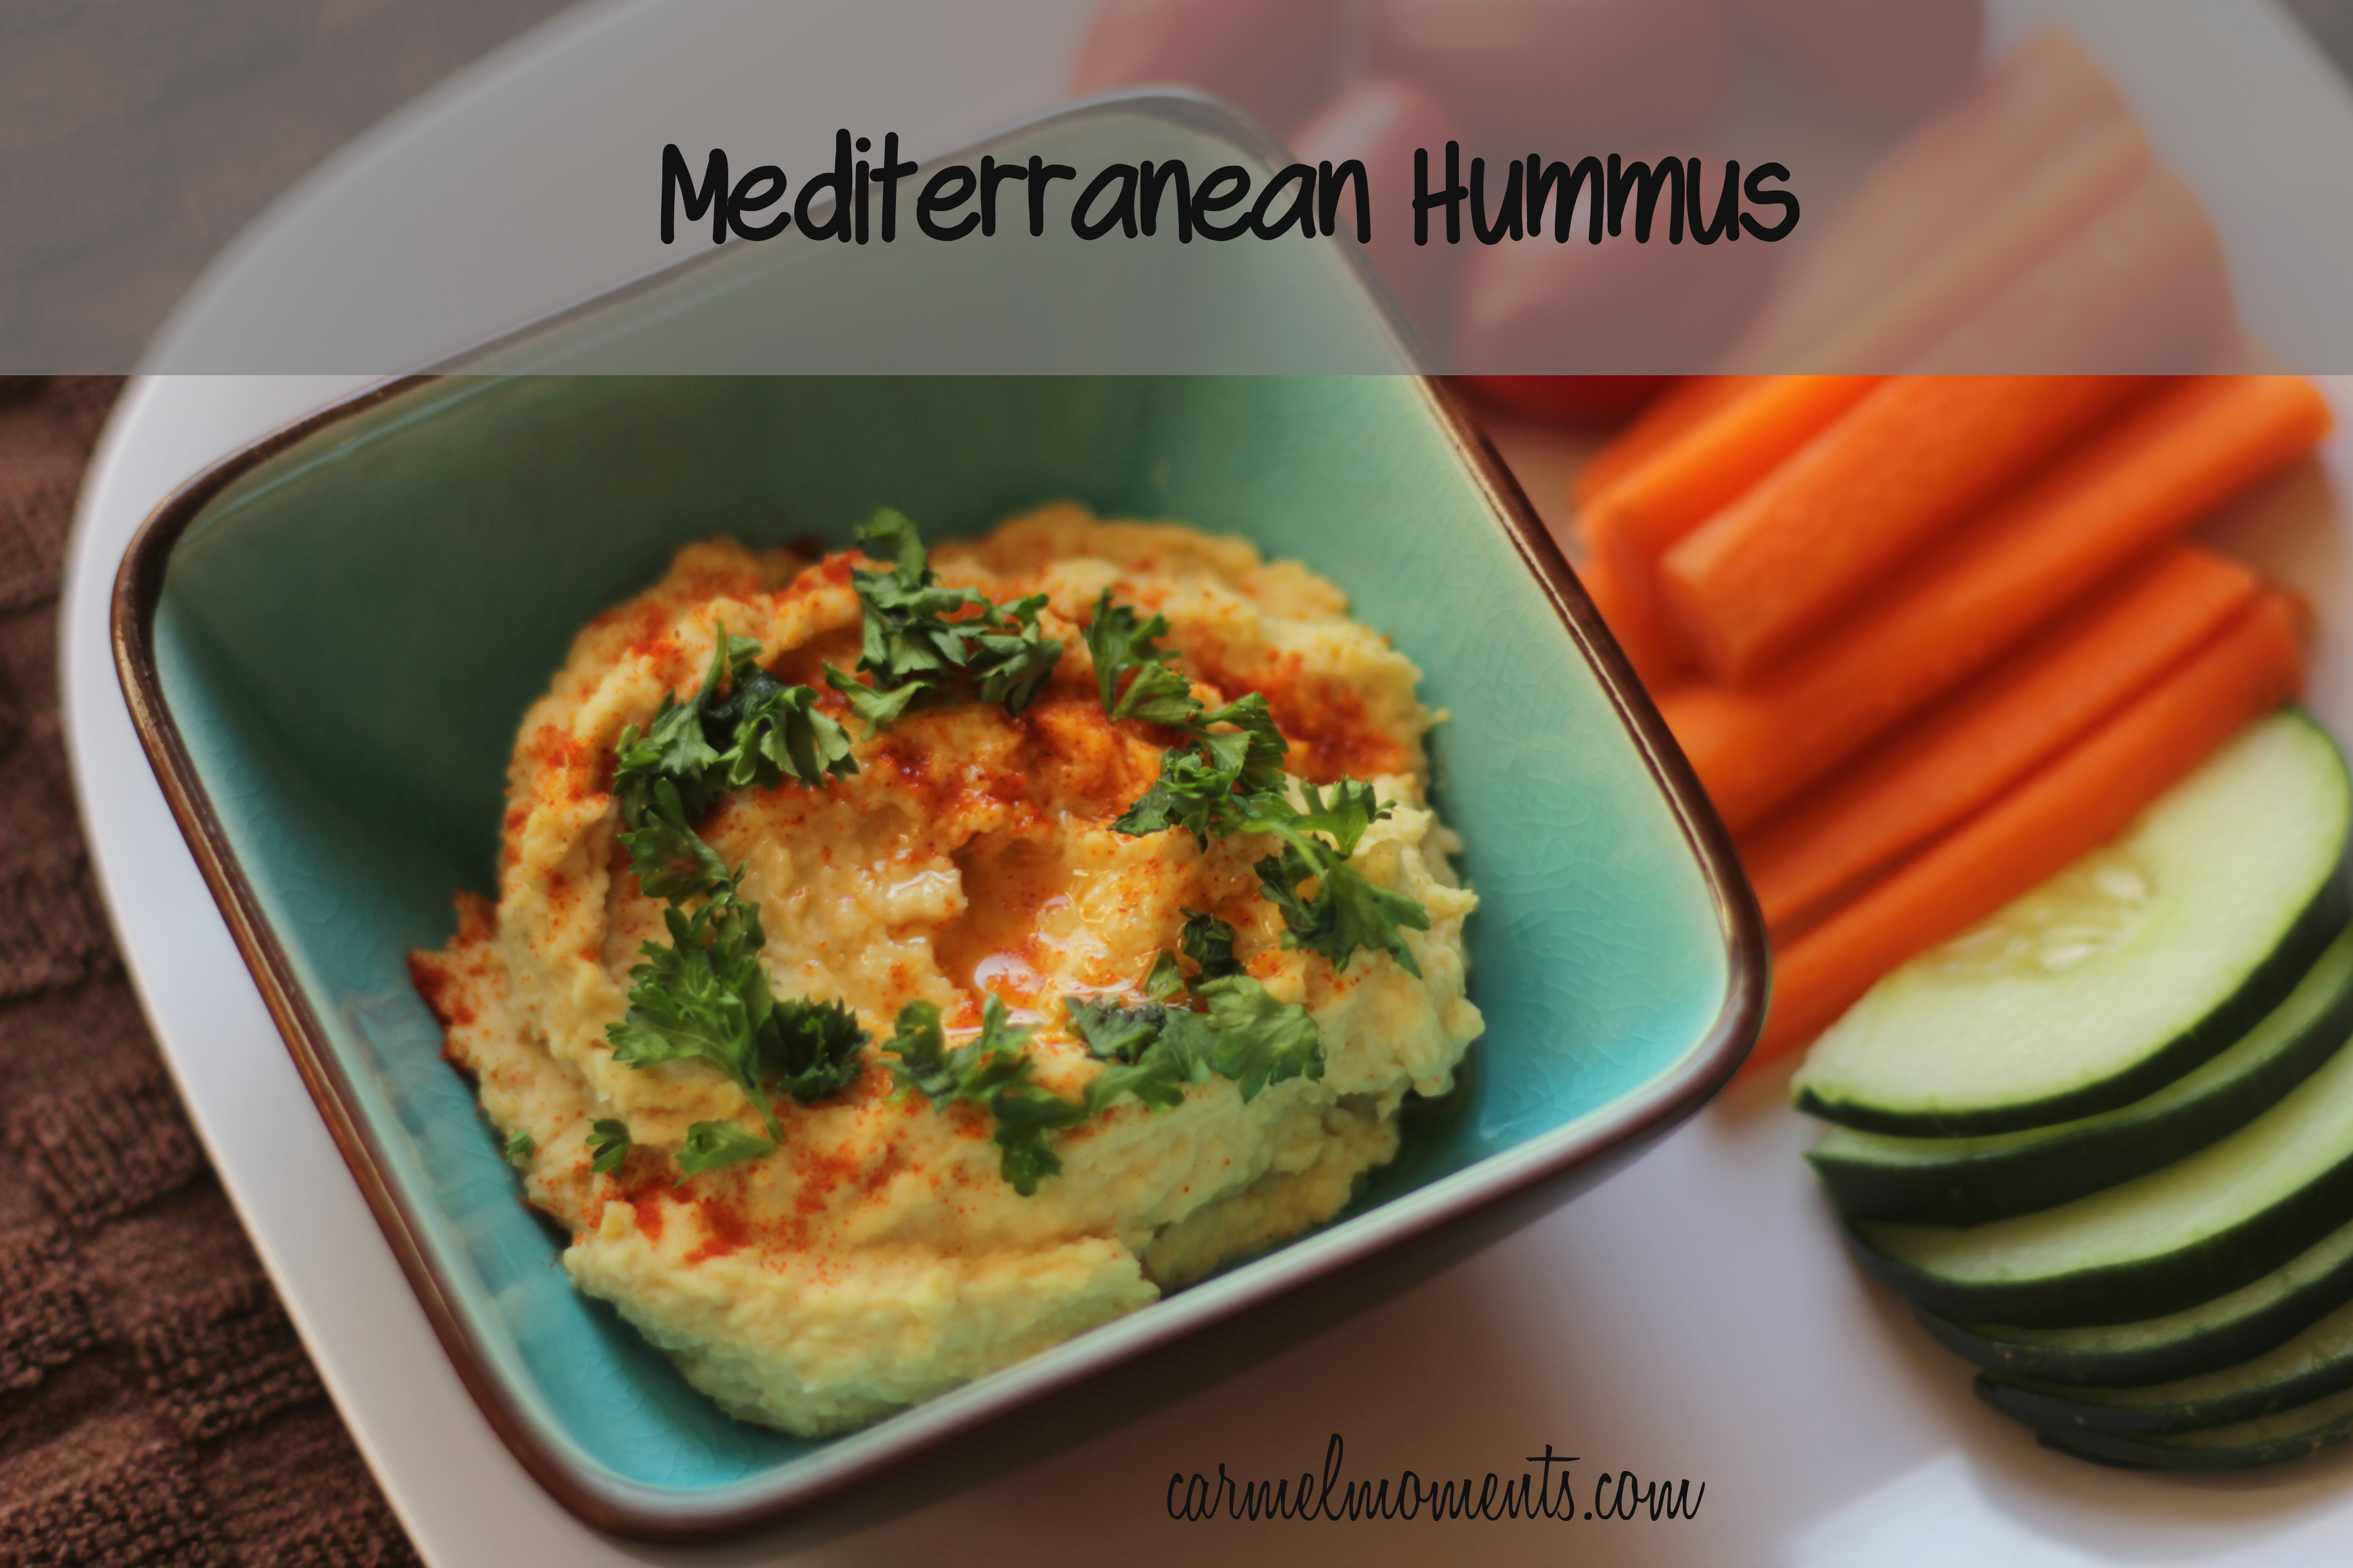 Mediterranean Hummus - Healthy hummus, fresh taste at home that mixes up in just minutes using the food processor.